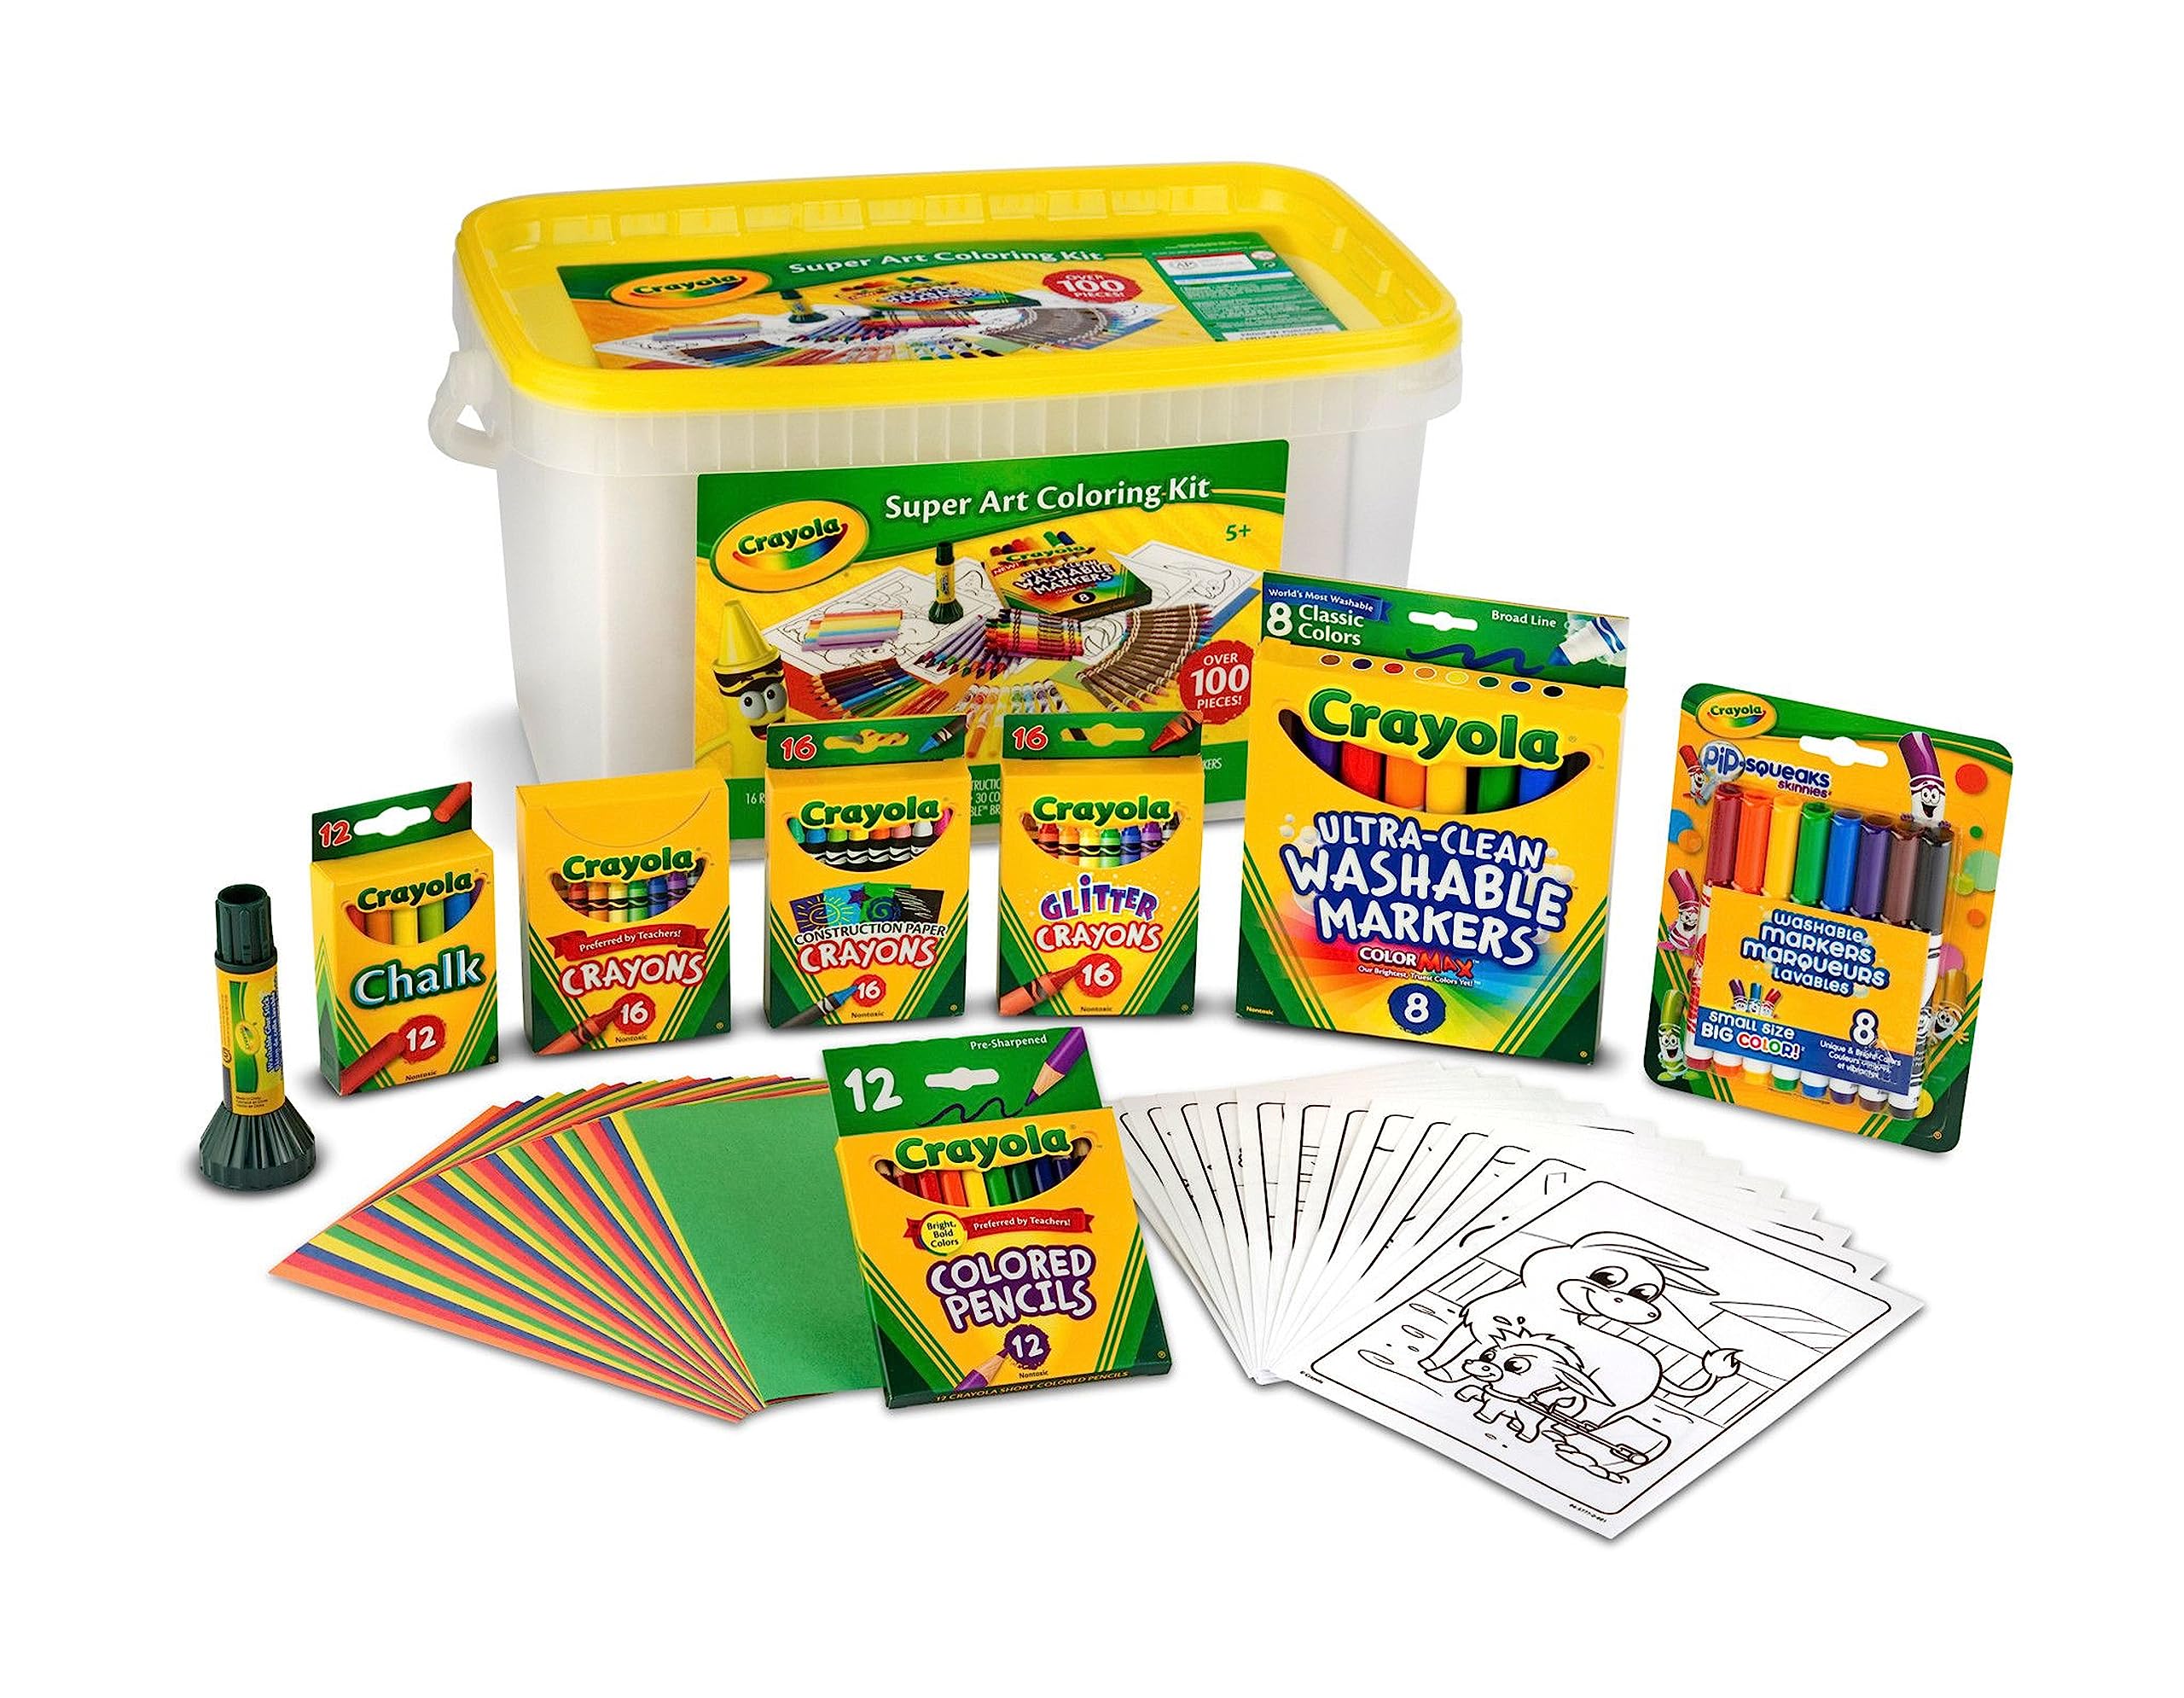 Crayola Super Art Coloring Kit, Arts & Crafts Gift for Girls & Boys, Styles Vary, 100+ Pcs [Amazon Exclusive]